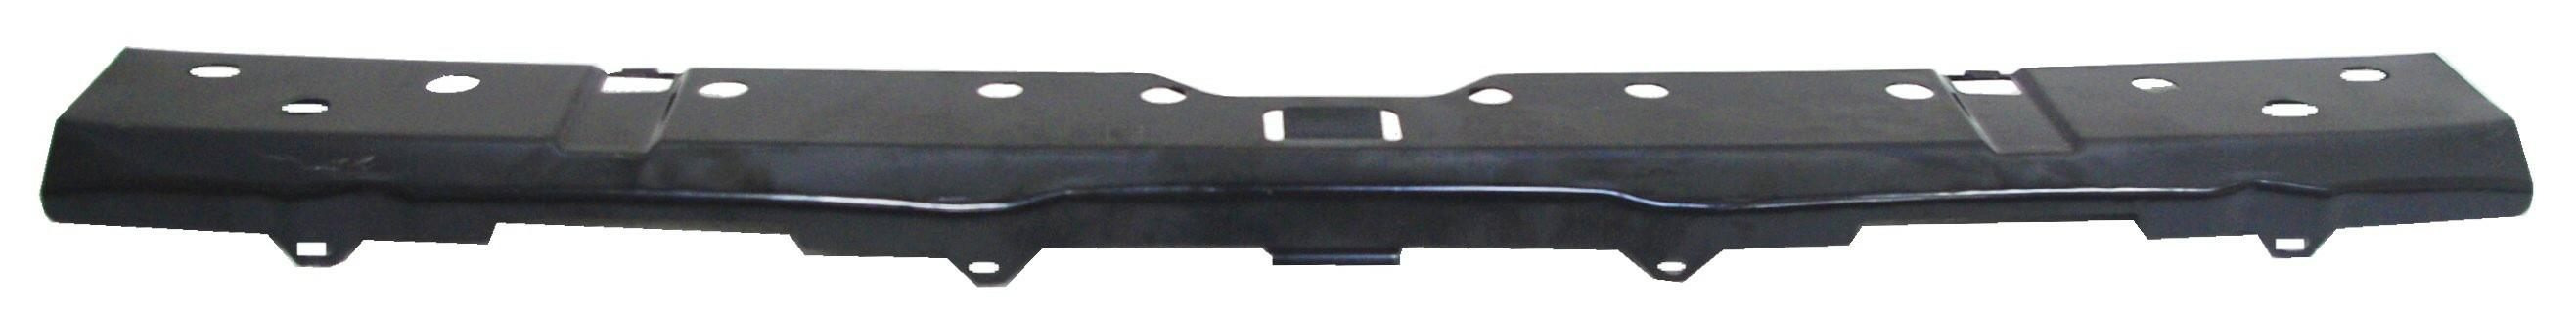 Aftermarket BRACKETS for SUBARU - LEGACY, LEGACY,15-19,Front bumper cover support